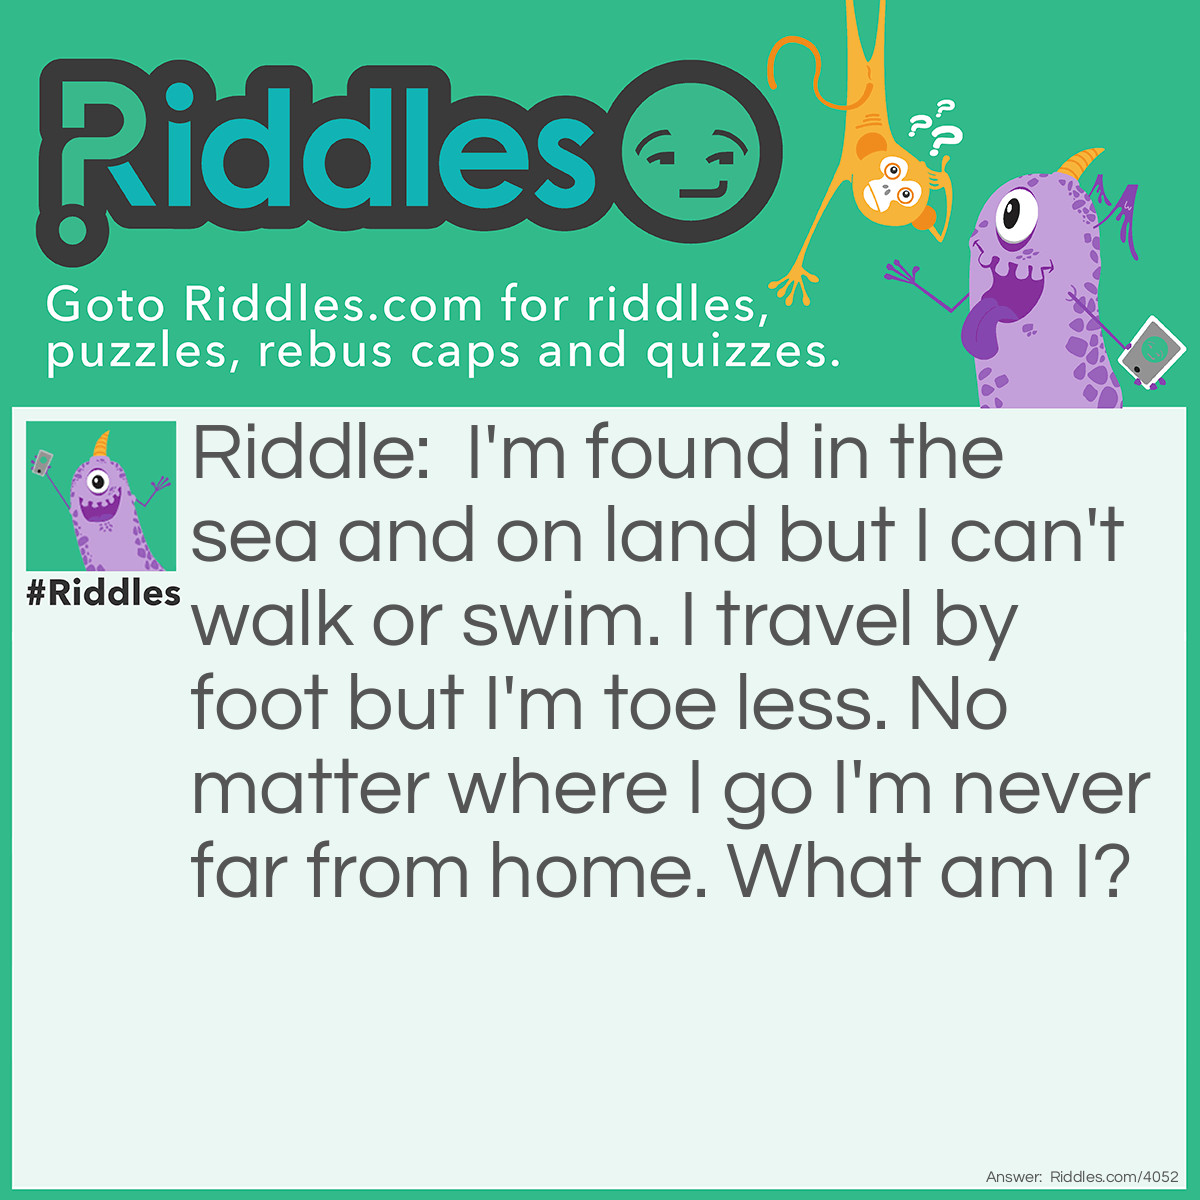 Riddle: I'm found in the sea and on land but I can't walk or swim. I travel by foot but I'm toe less. No mater where I go I'm never far from home. What am I ? Answer: A snail.